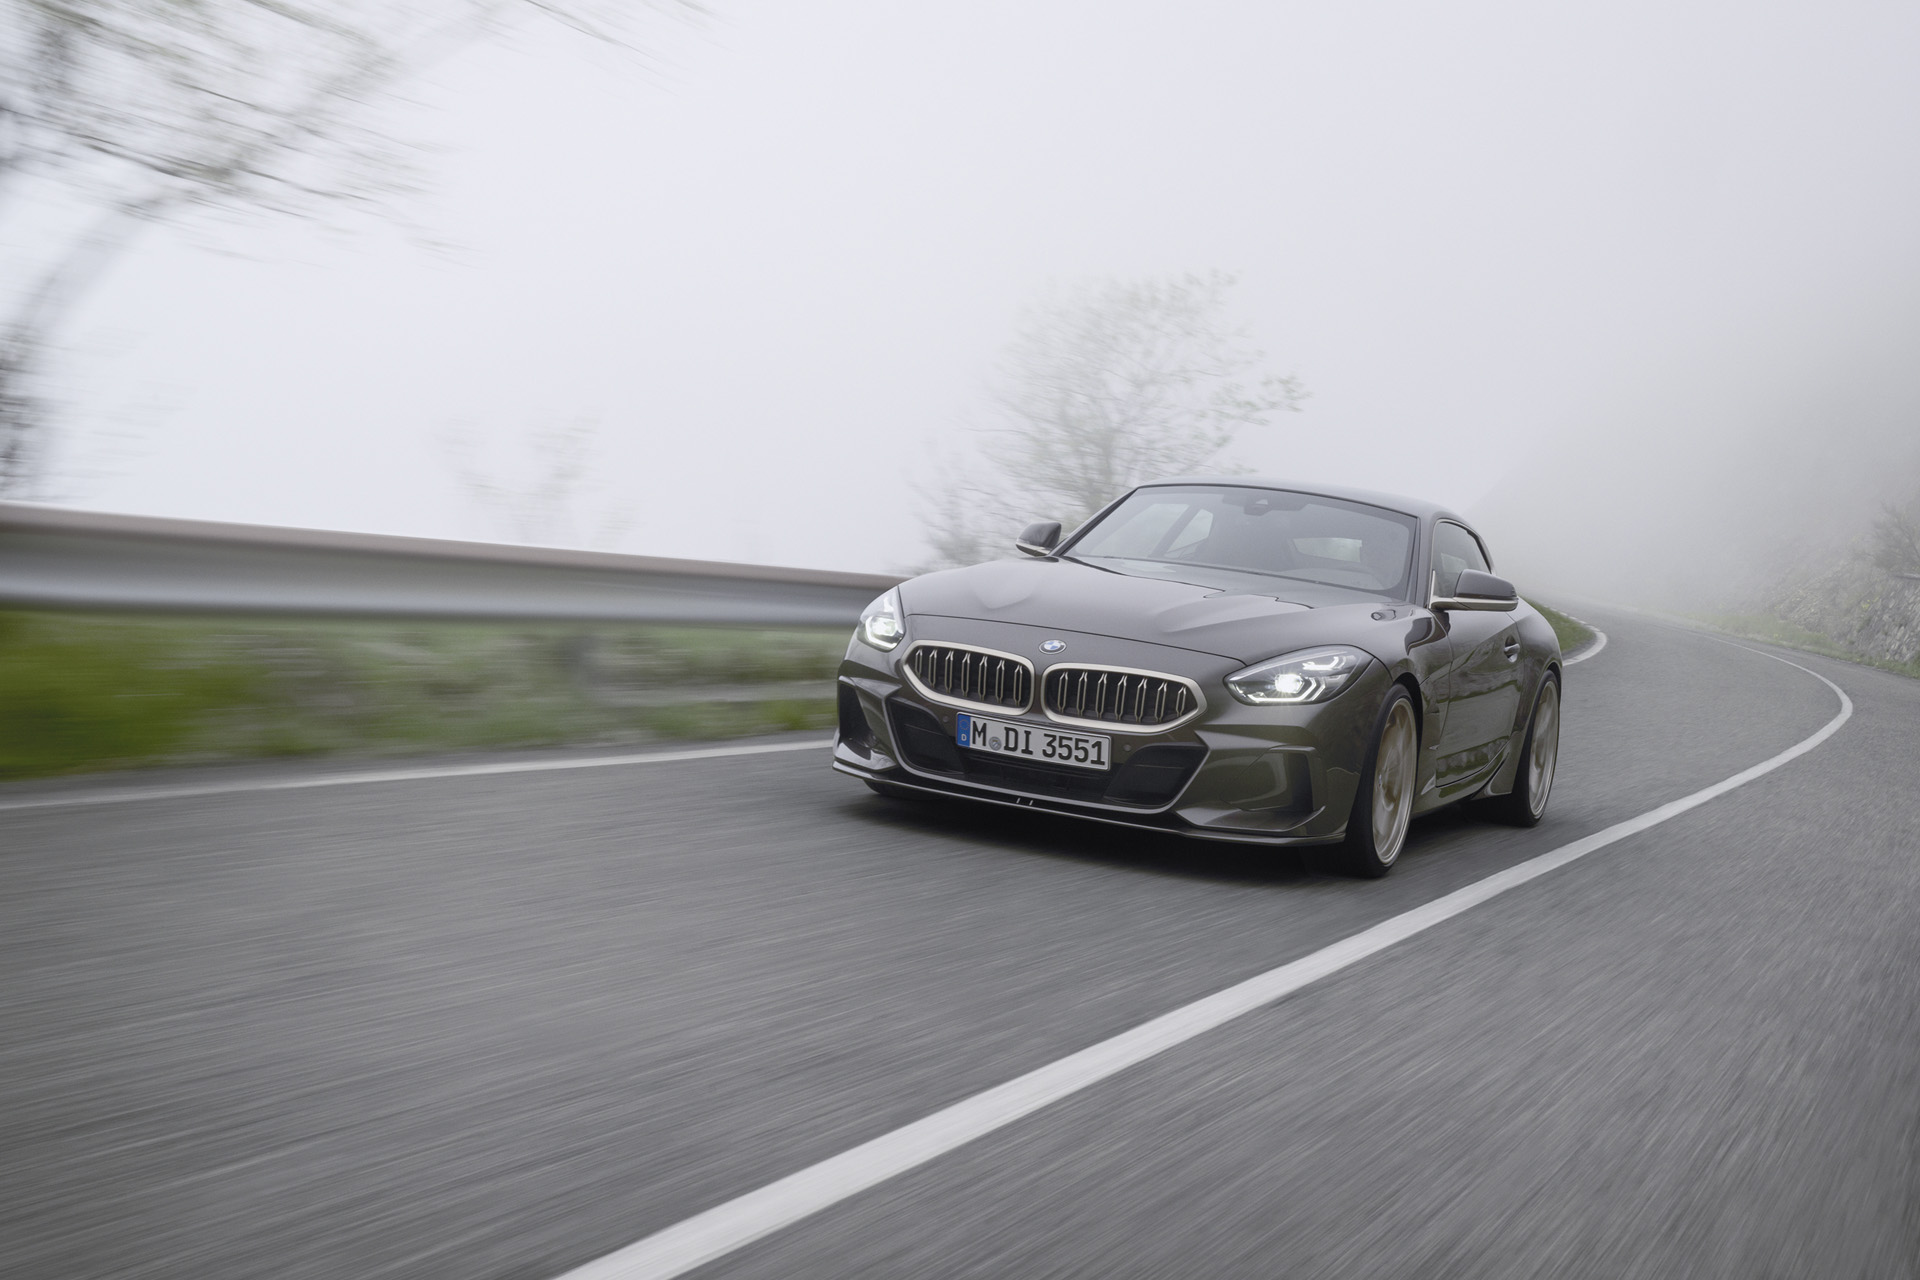 BMW concept touring coupe inspired by Z4 shooting brake